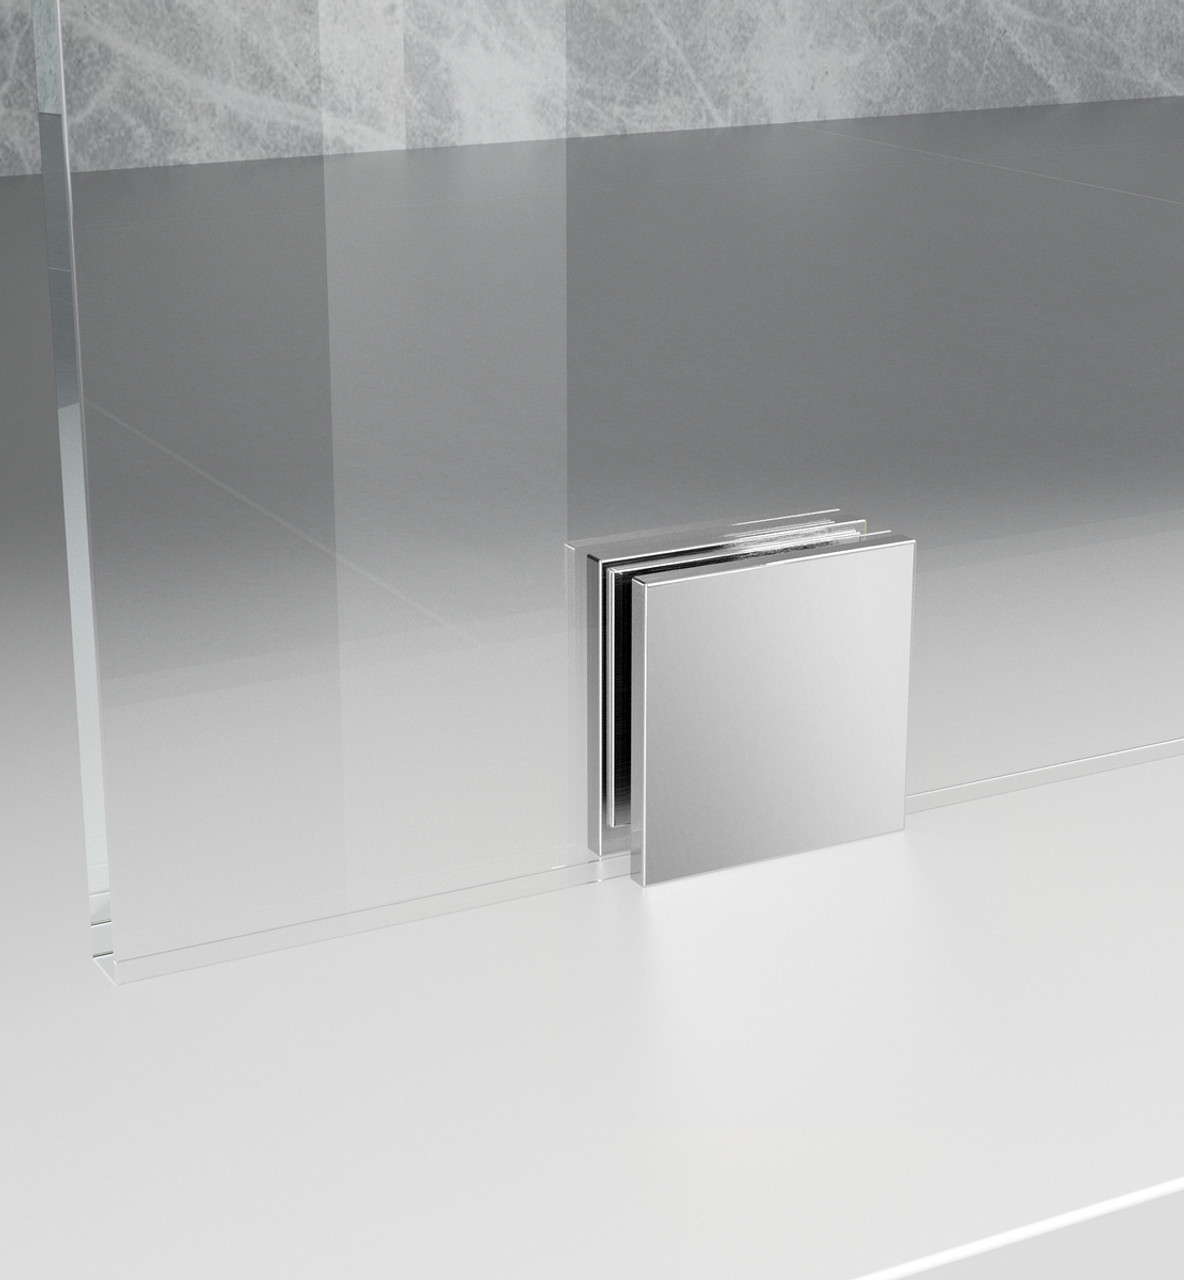 Elegant Kitchen and Bath SD155-3578PCH Fixed frameless shower door 35 x 78 Polished Chrome